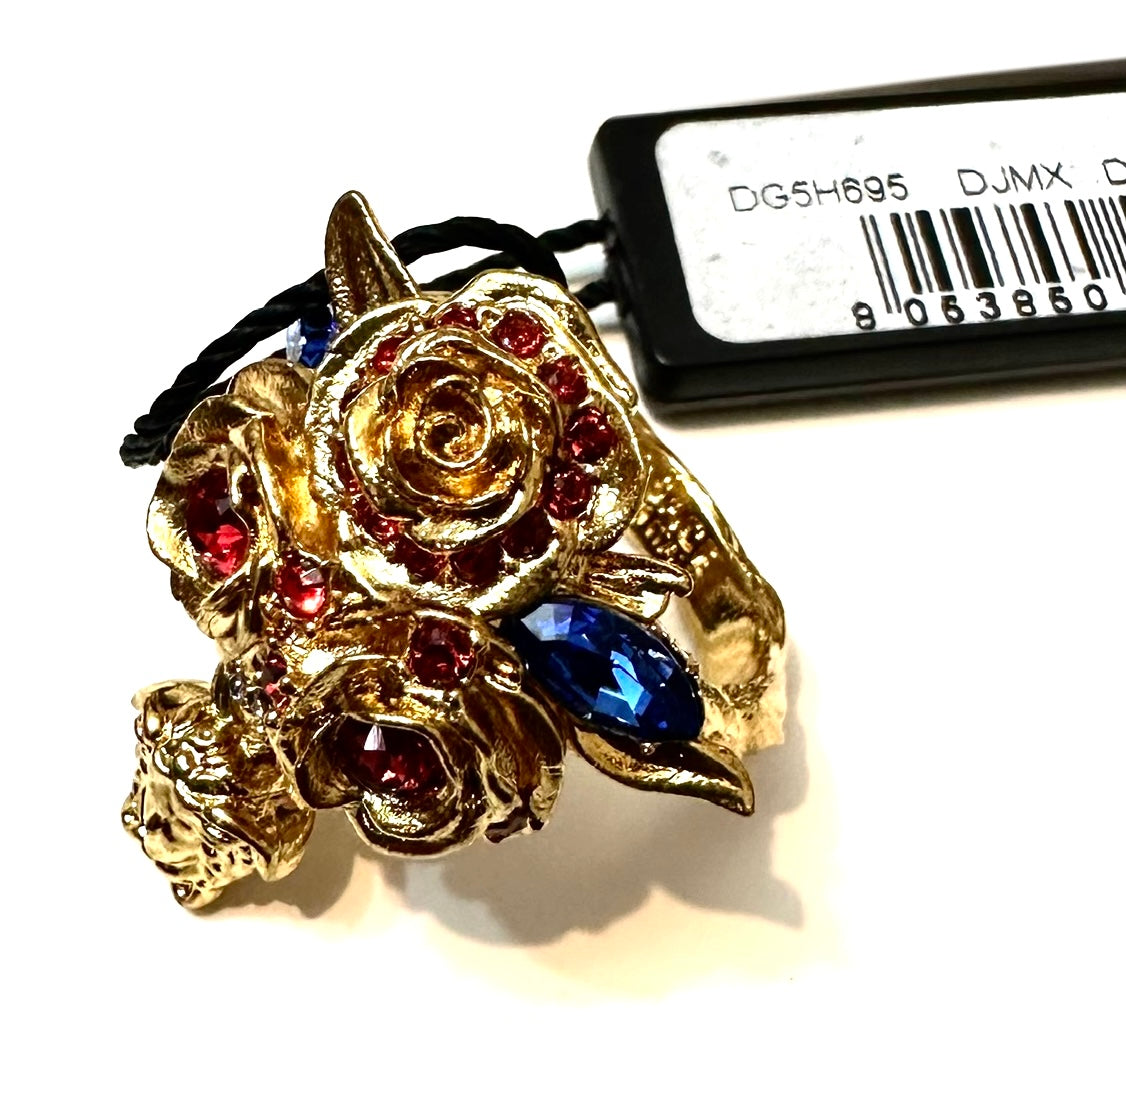 Versace gold plated floral ring with medusa charm and colorful rhinestones, BNWT boxed